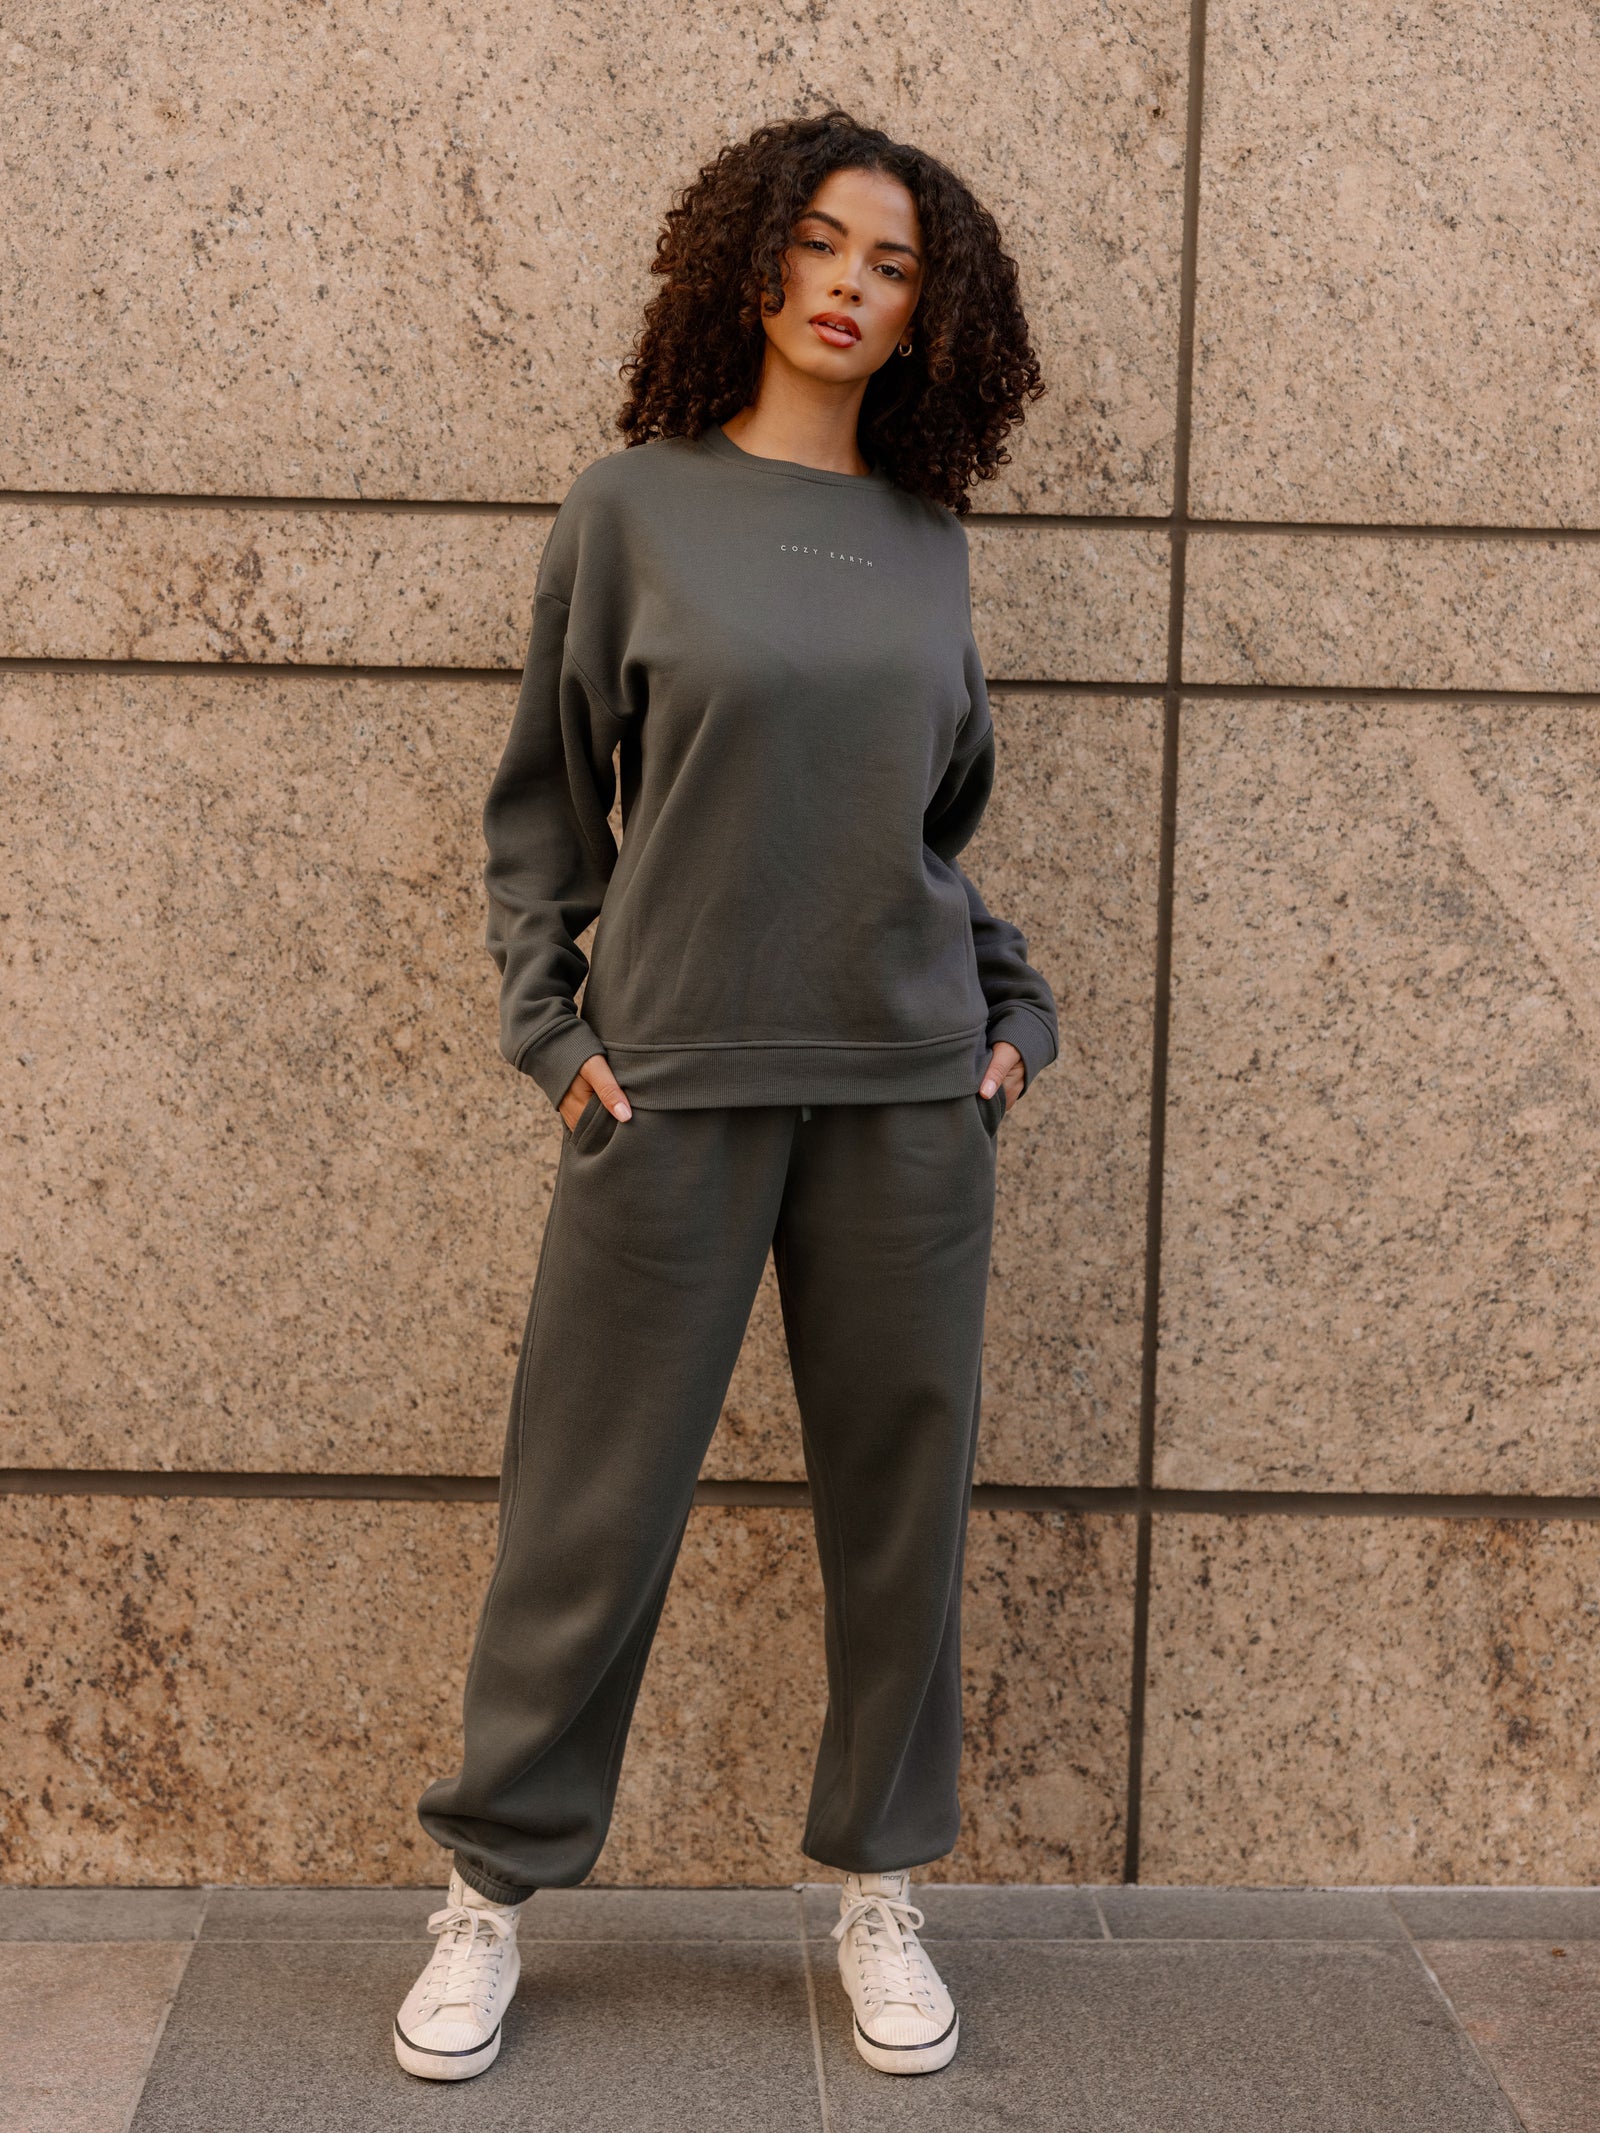 Storm CityScape Pullover Crew. The Pullover is being worn by a female model. Accompanying city scape clothing is being worn to complete the look of the outfit. The photo was taken with a city building background. 